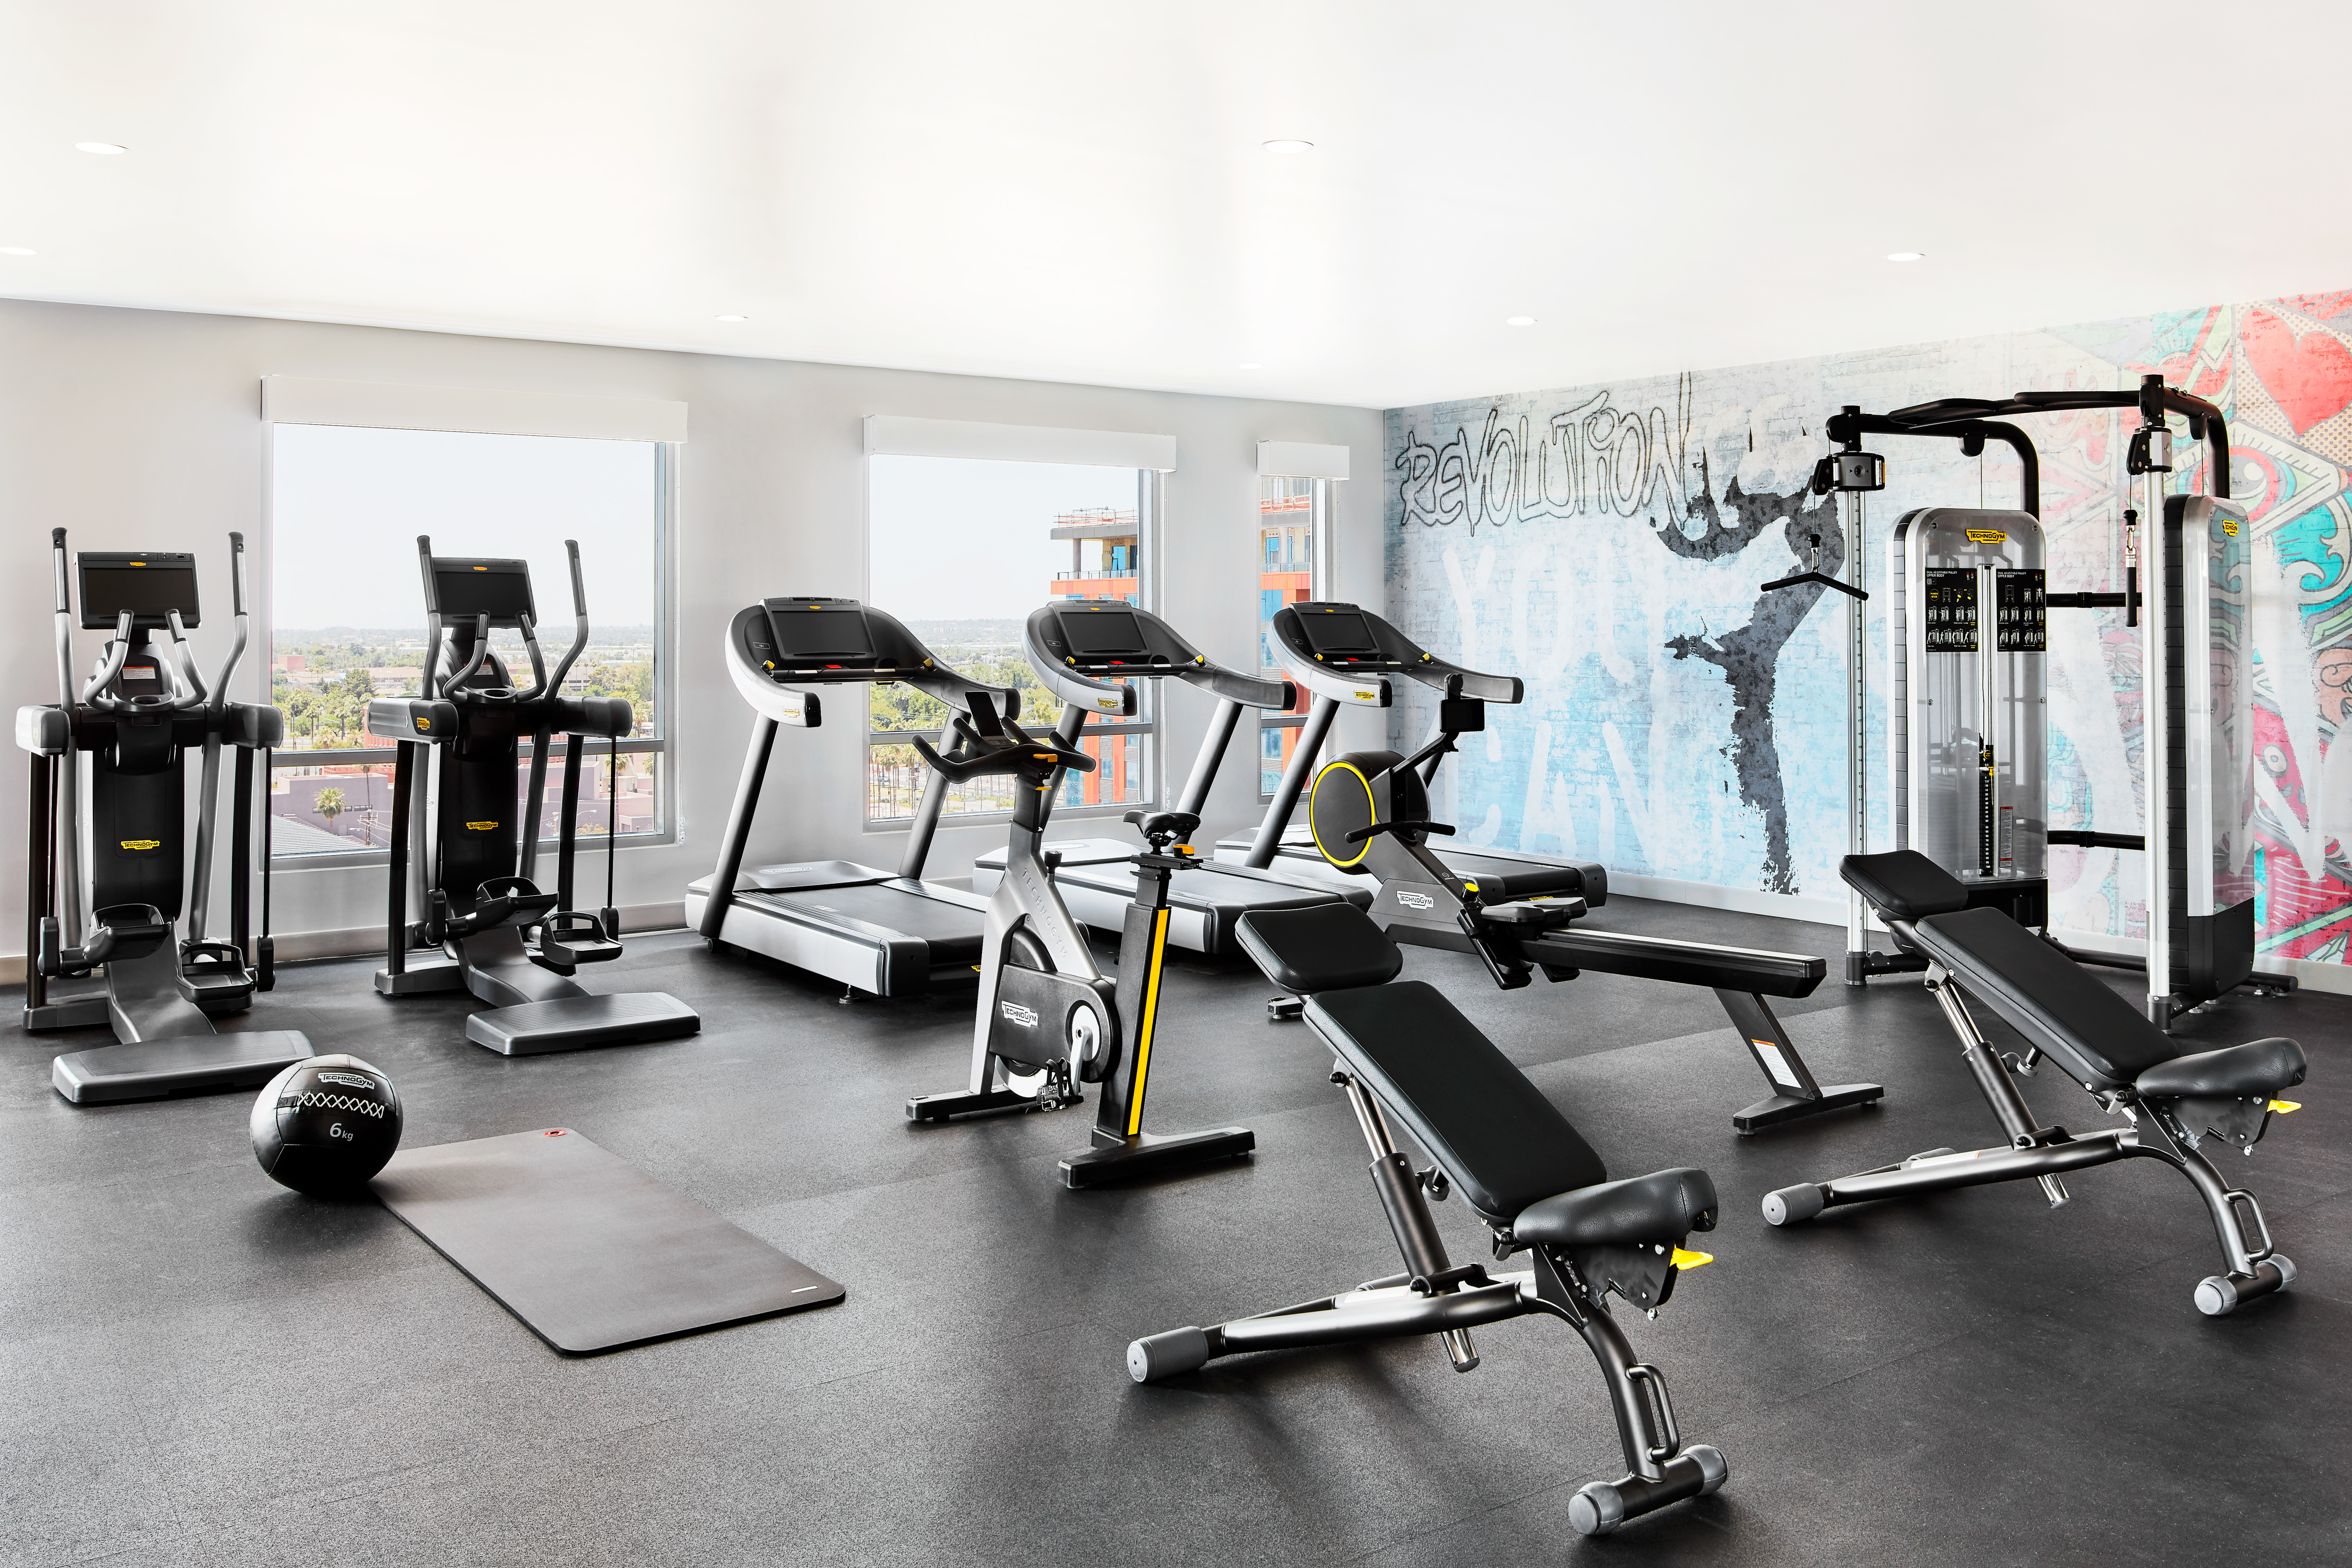 Fitness center with cardio machines and benches